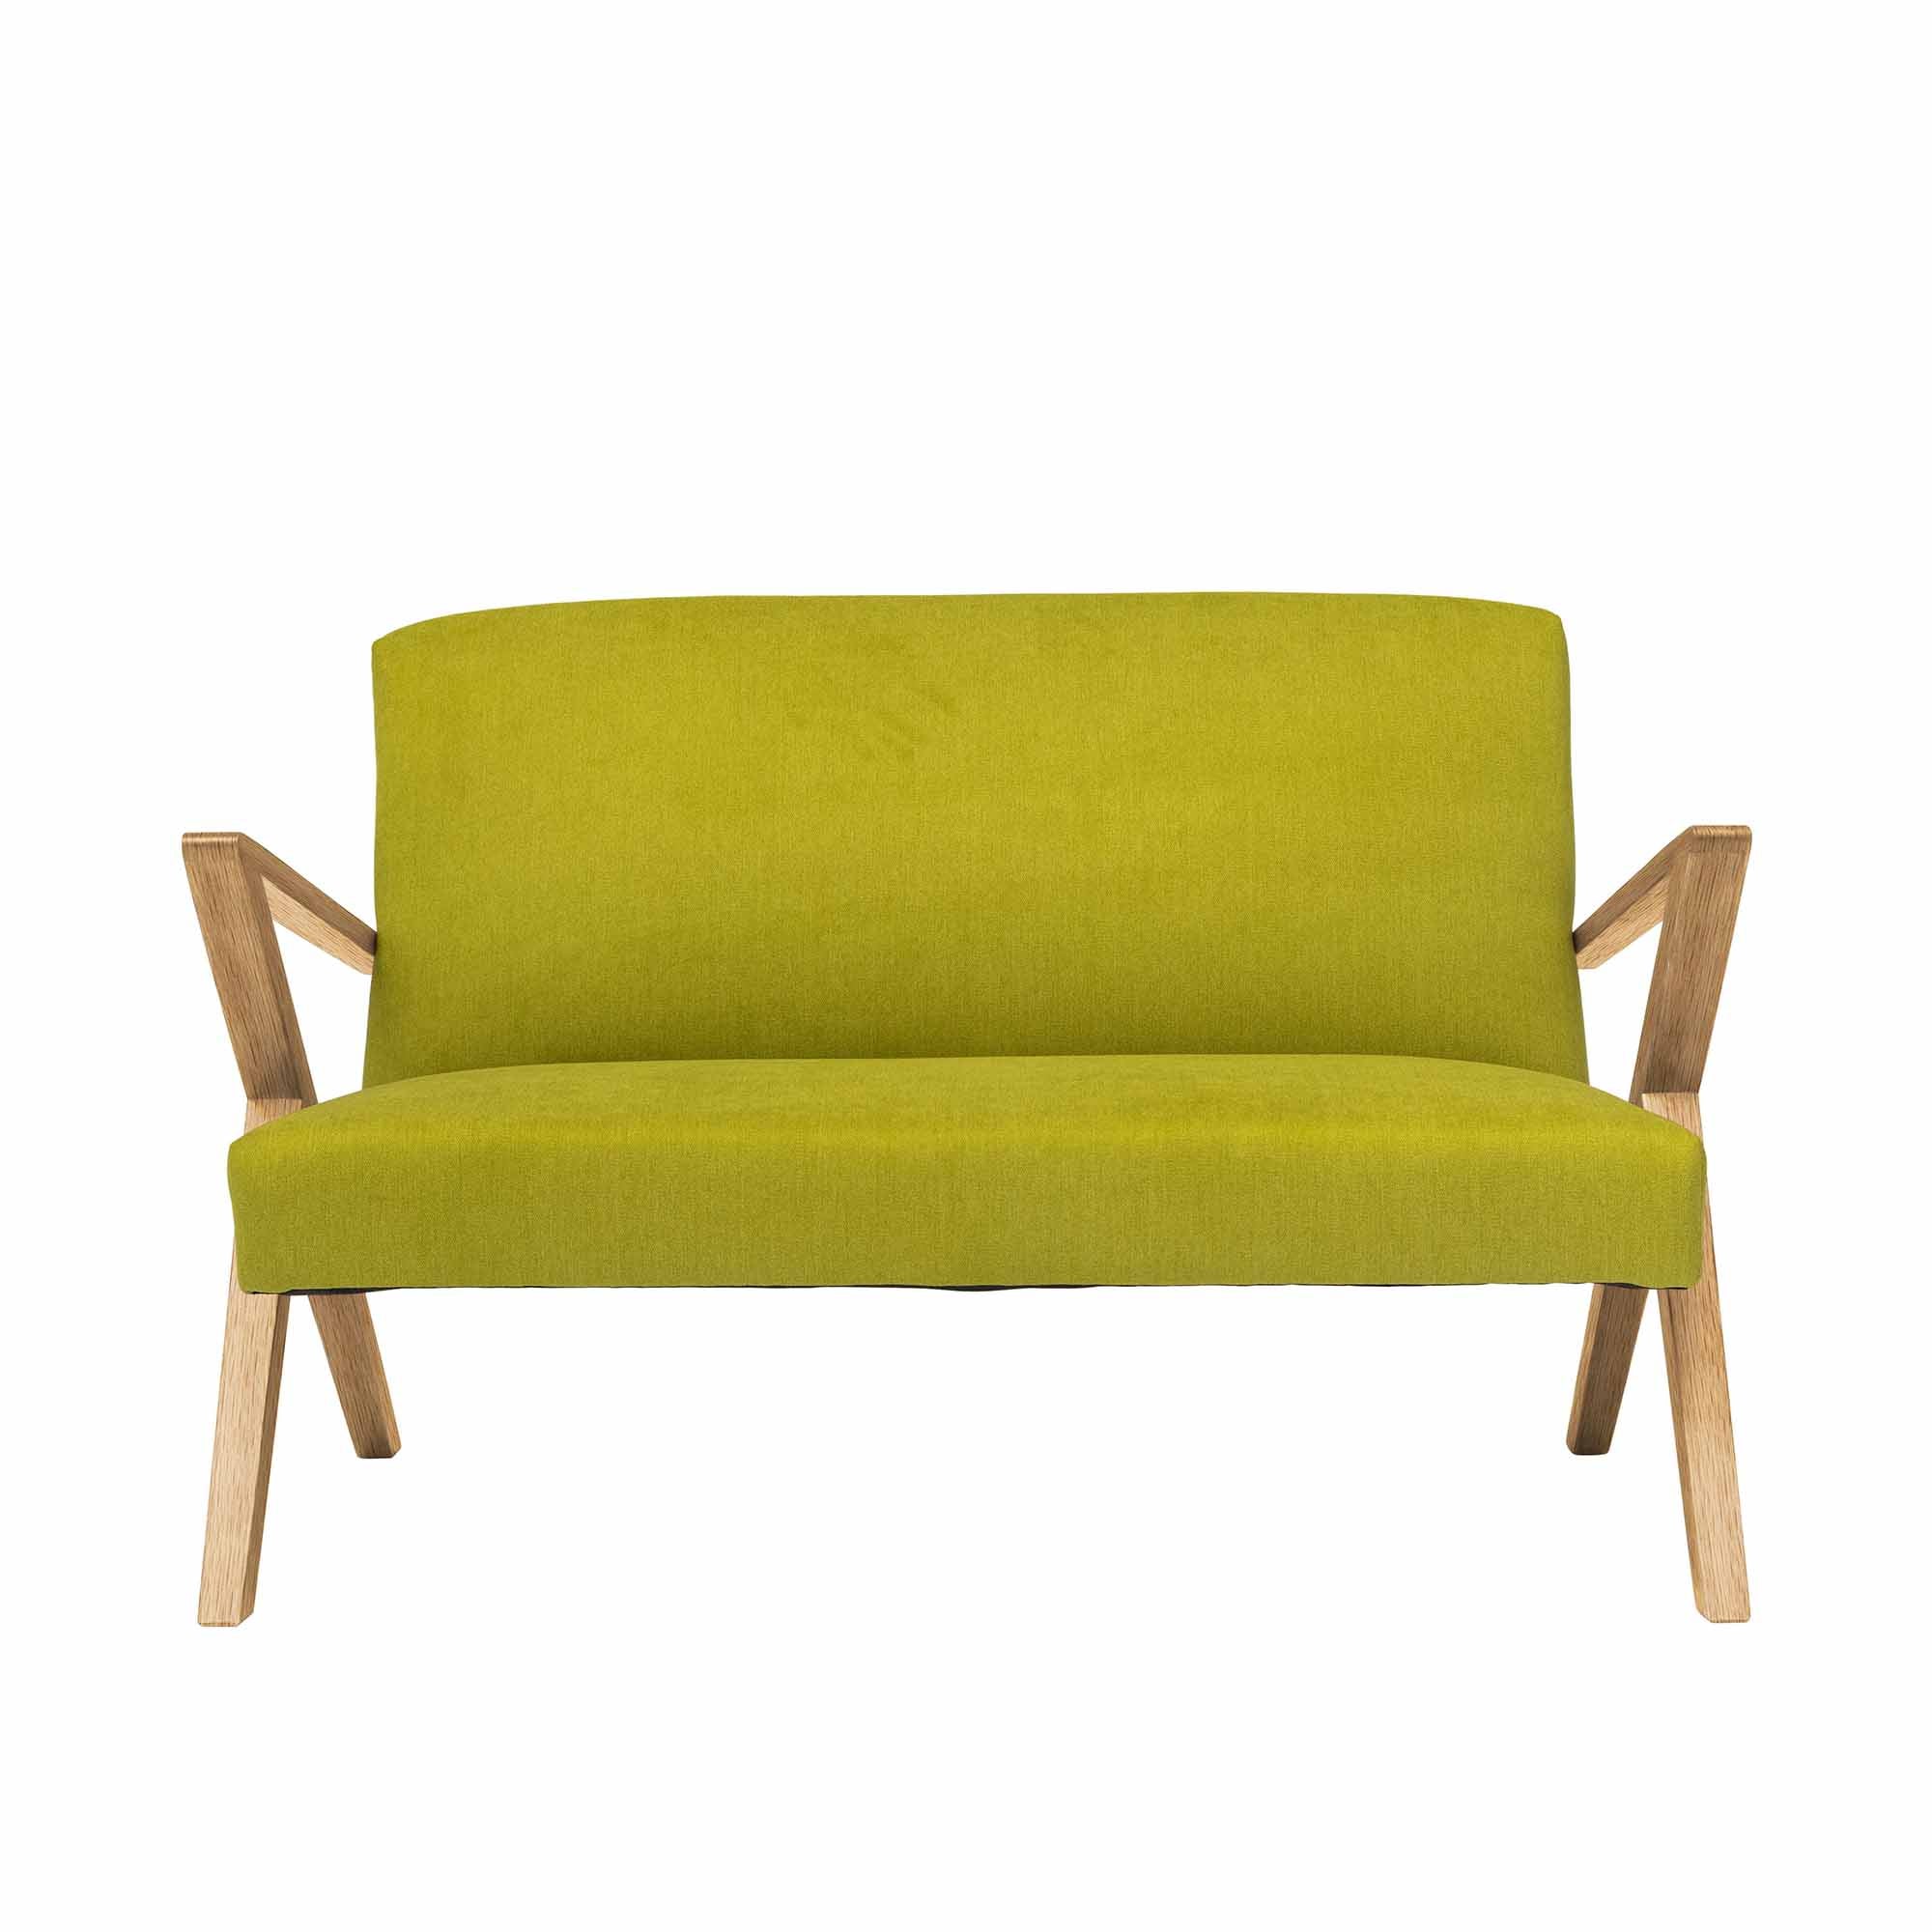  2-Seater Sofa, Oak Wood Frame, Natural Colour green fabric, front view